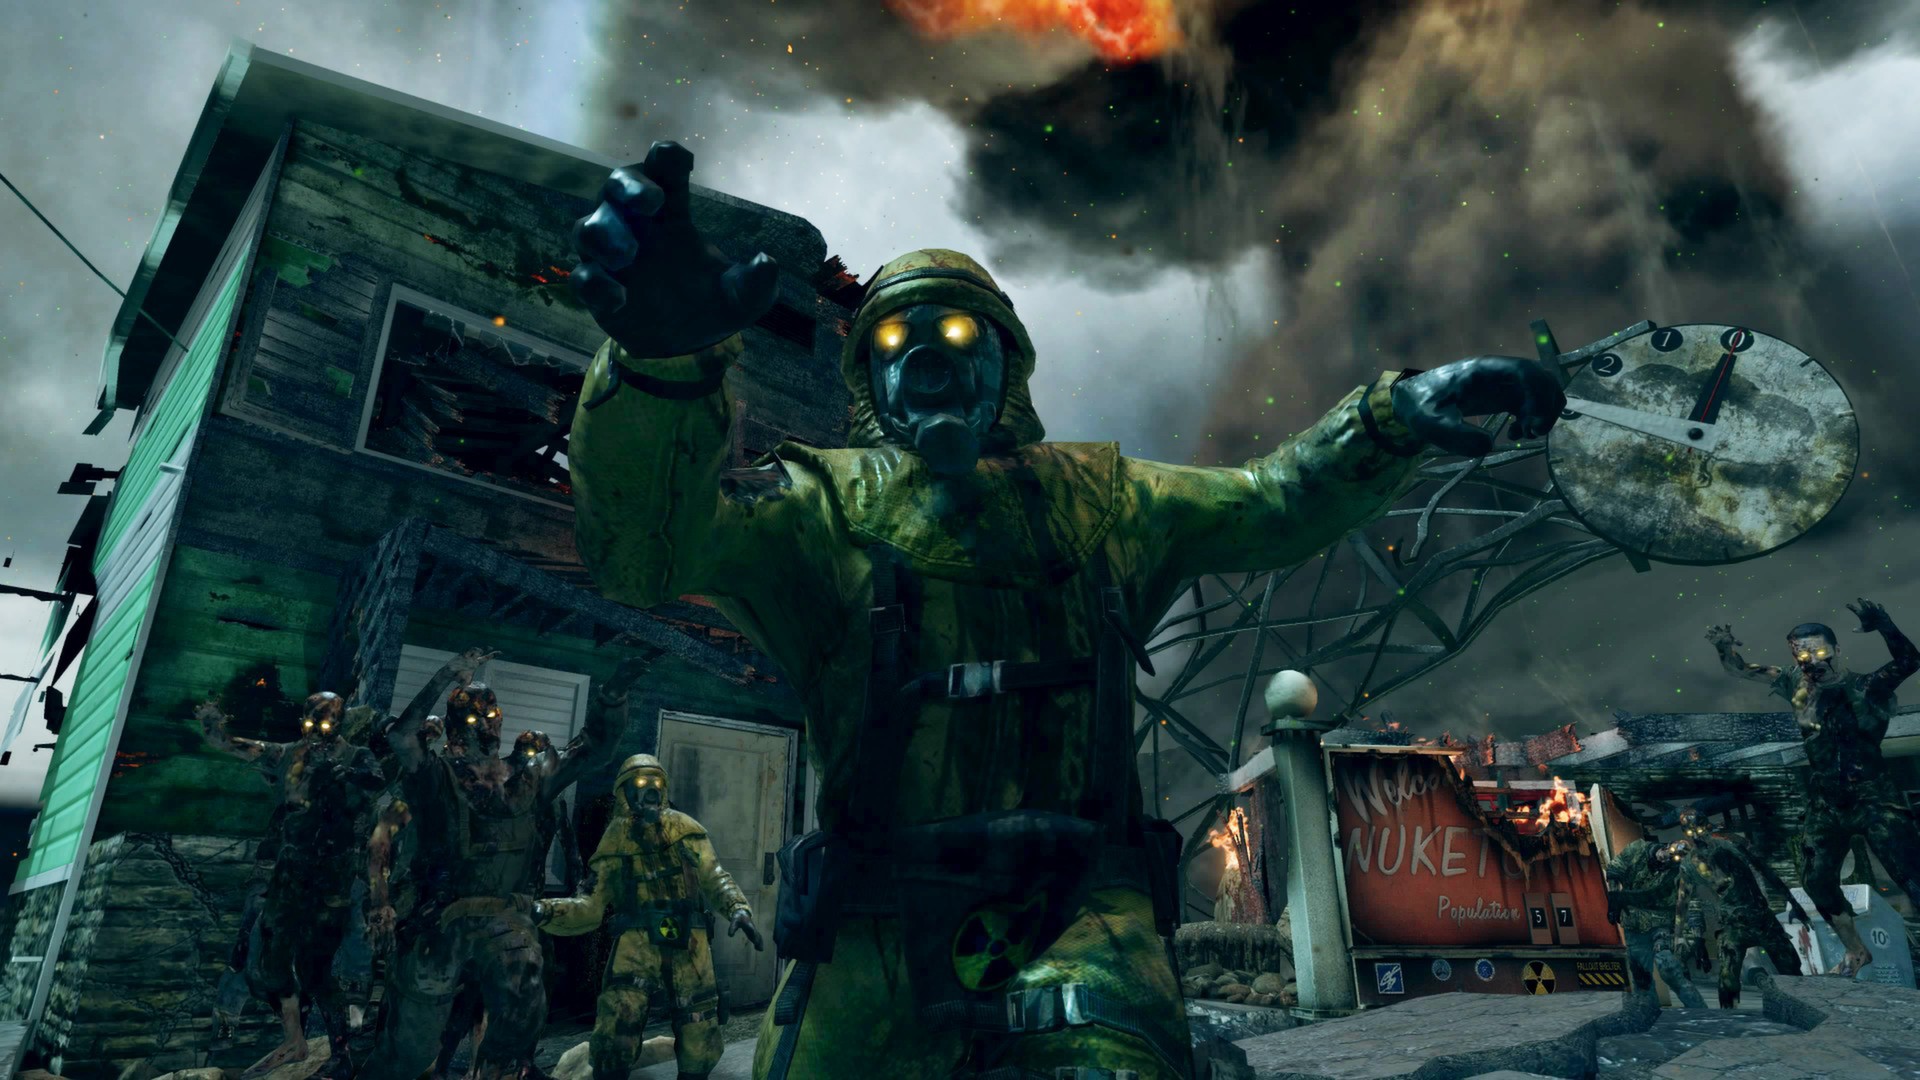 Call of Duty®: Black Ops II - Nuketown Zombies Map Featured Screenshot #1